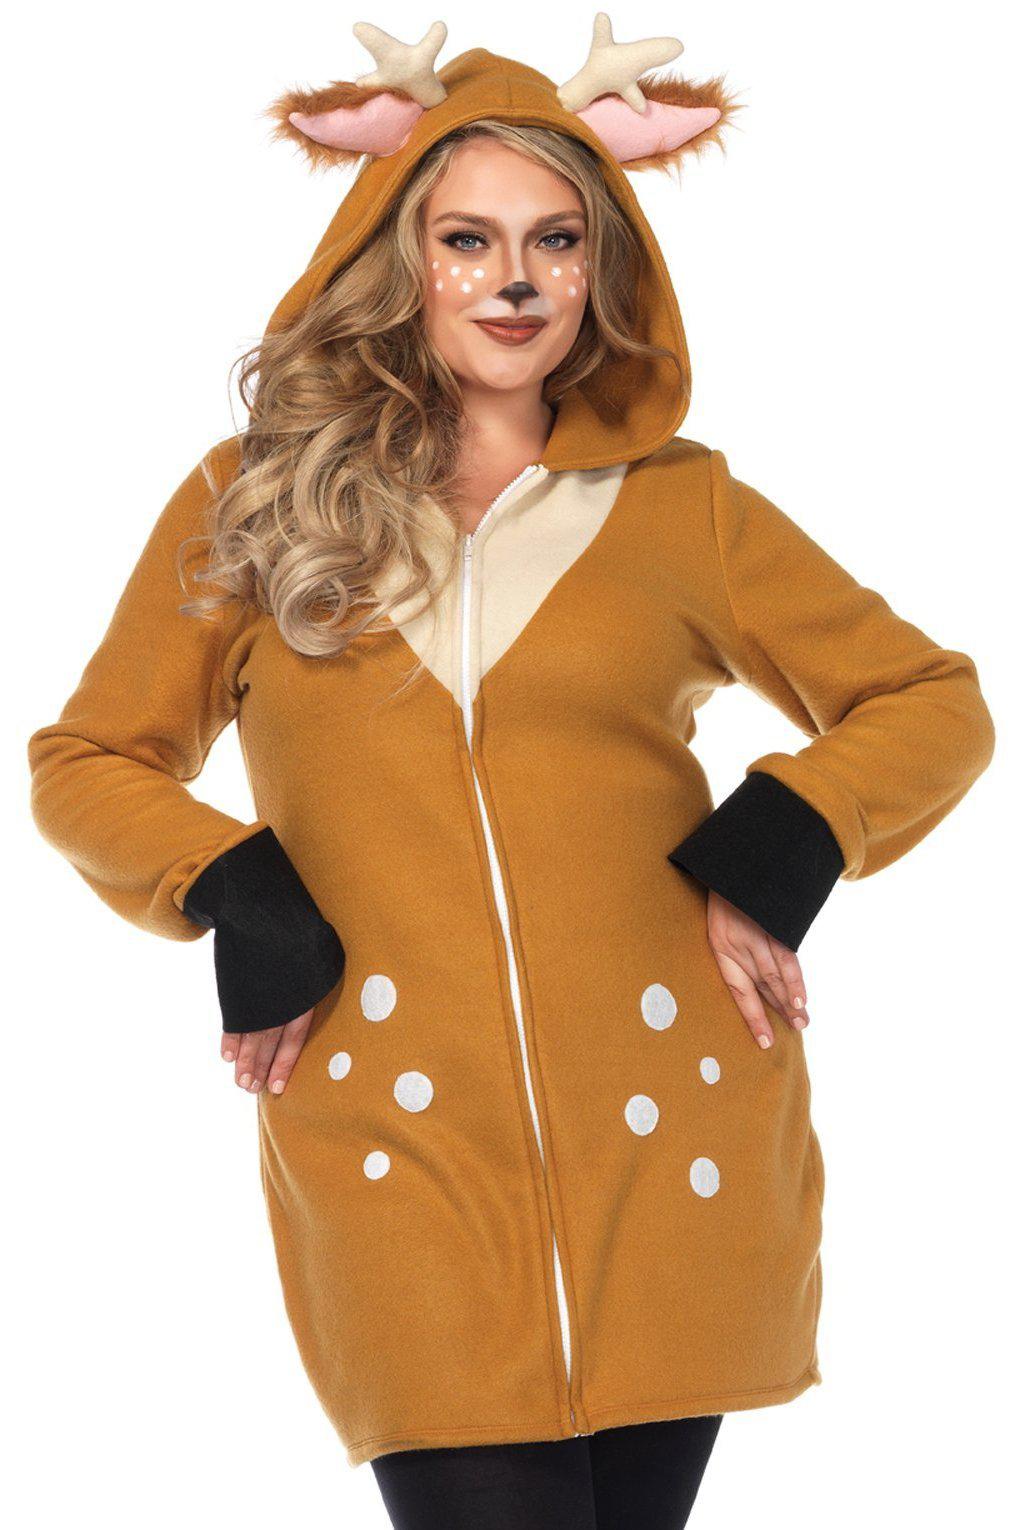 Plus Size Sexy Fawn Costume Dress-Animal Costumes-Leg Avenue-Brown-1/2XL-SEXYSHOES.COM